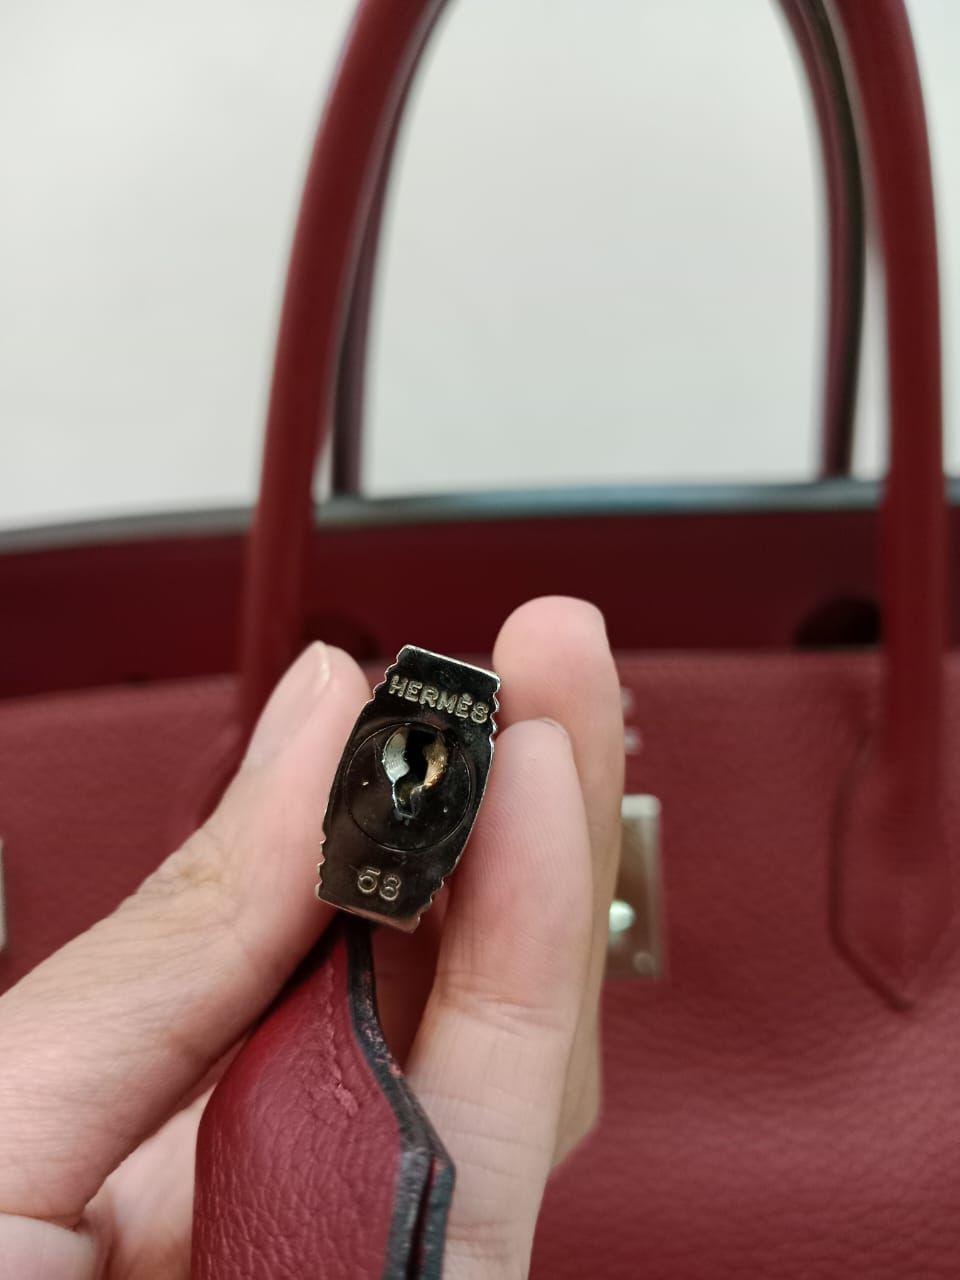 Beautiful vintage birkin 40 in rubis with palladium hardware. Overall in beautiful condition with minor tarnishing on the hardware. Light creasing and scuffs on the leather body. Stamp Square H (2004). Comes with its dust bag, clochette, keys and